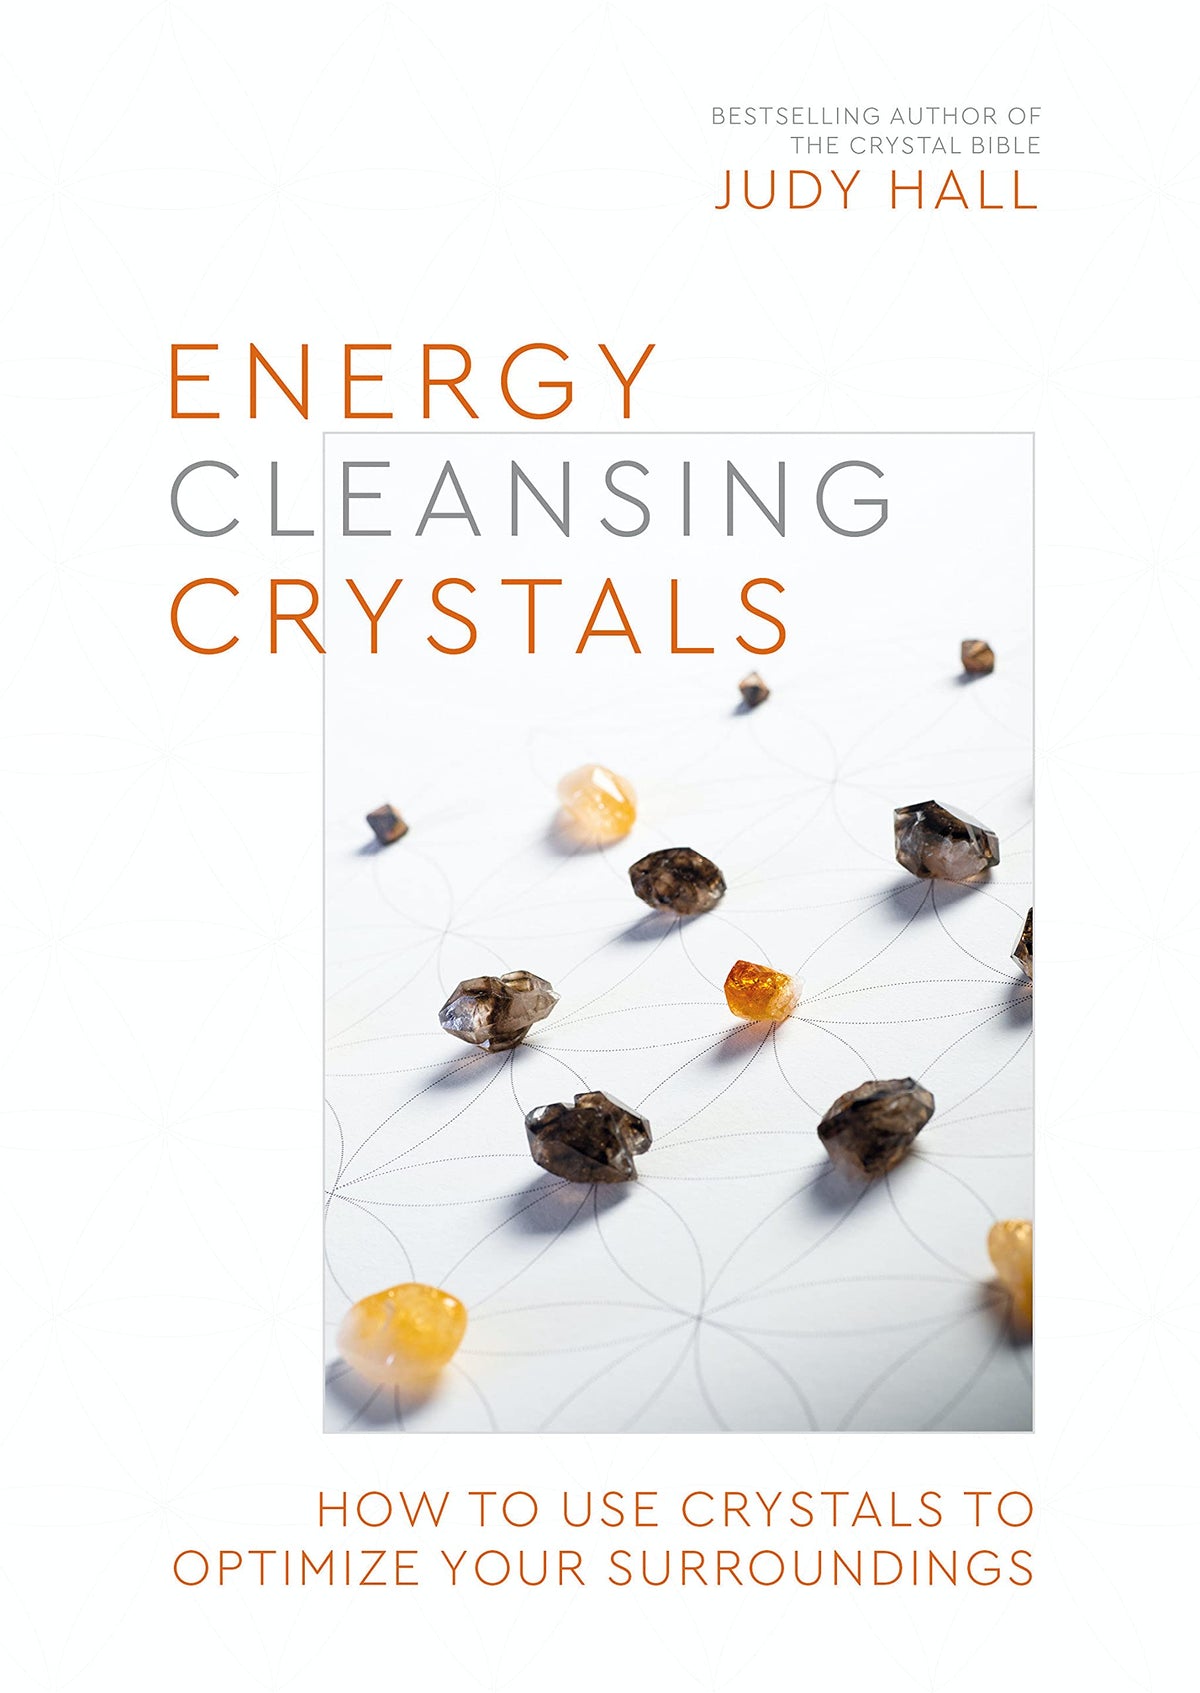 Energy-Cleansing Crystals: How to Use Crystals to Optimize Your Surroundings by Judy Hall